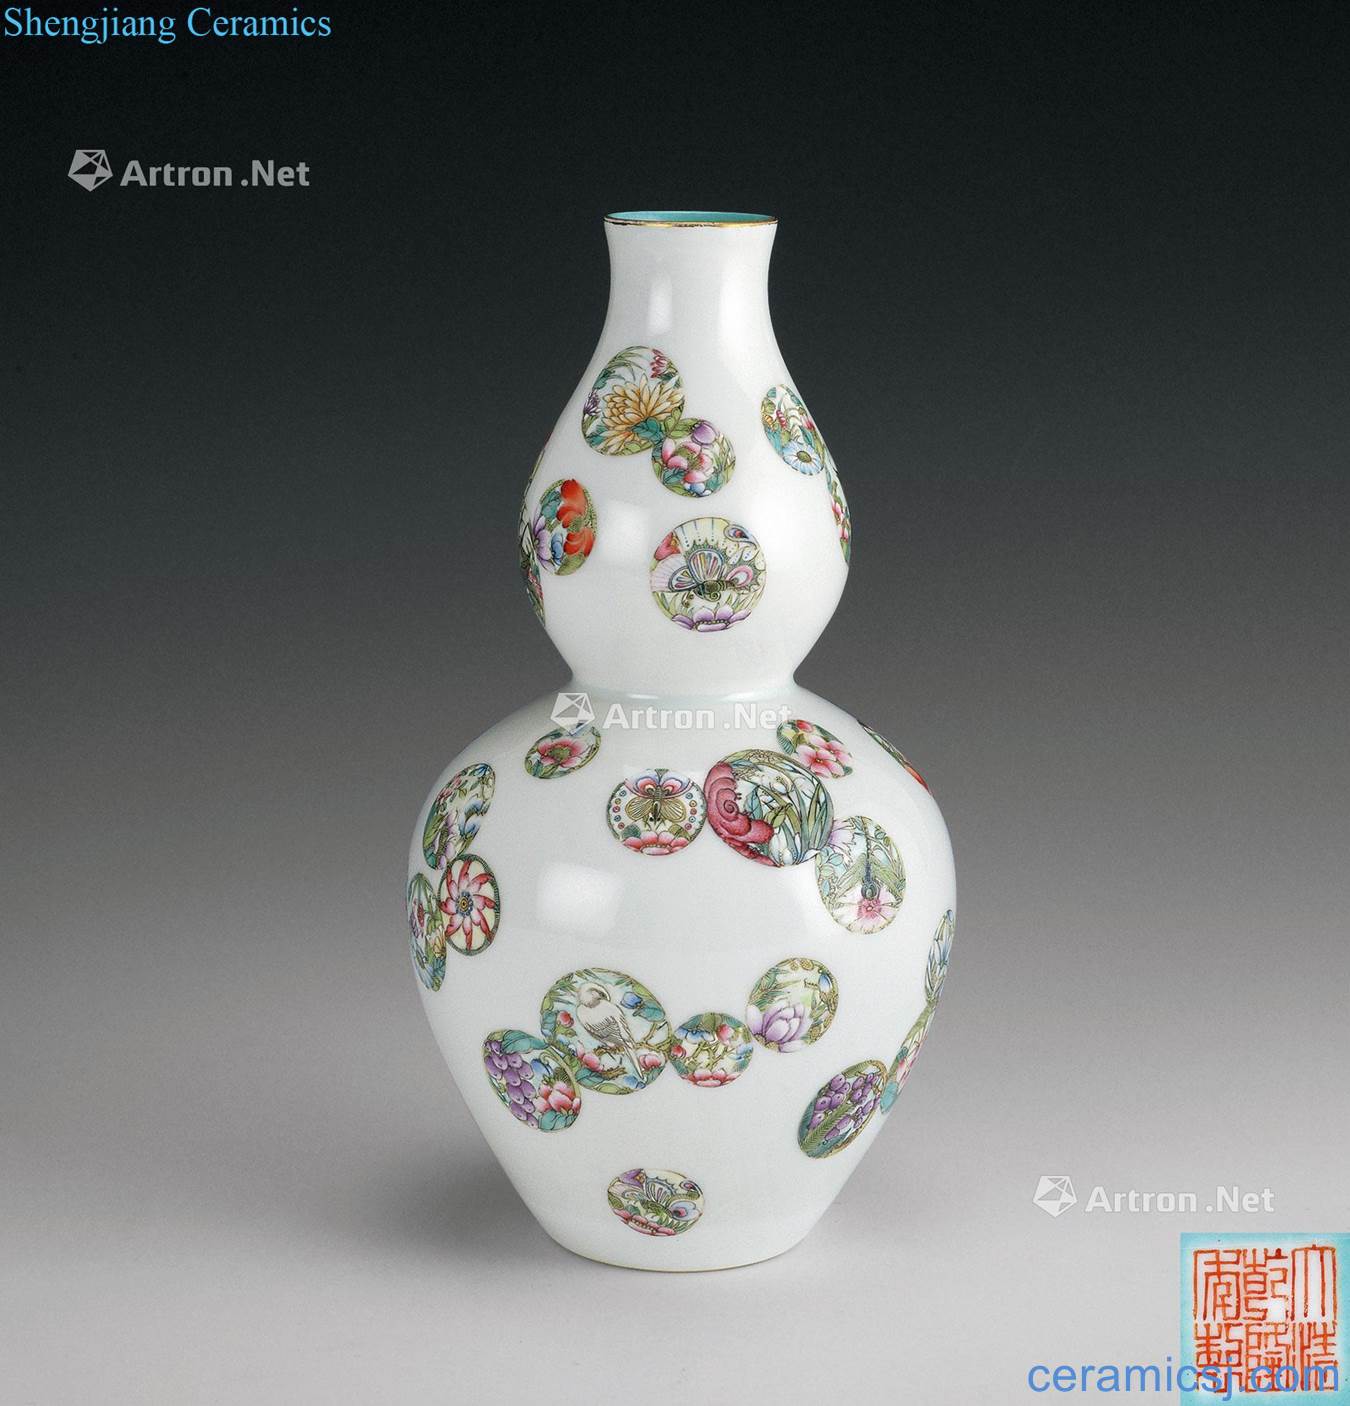 In the qing dynasty (1644-1911), pastel spends the gourd bottle